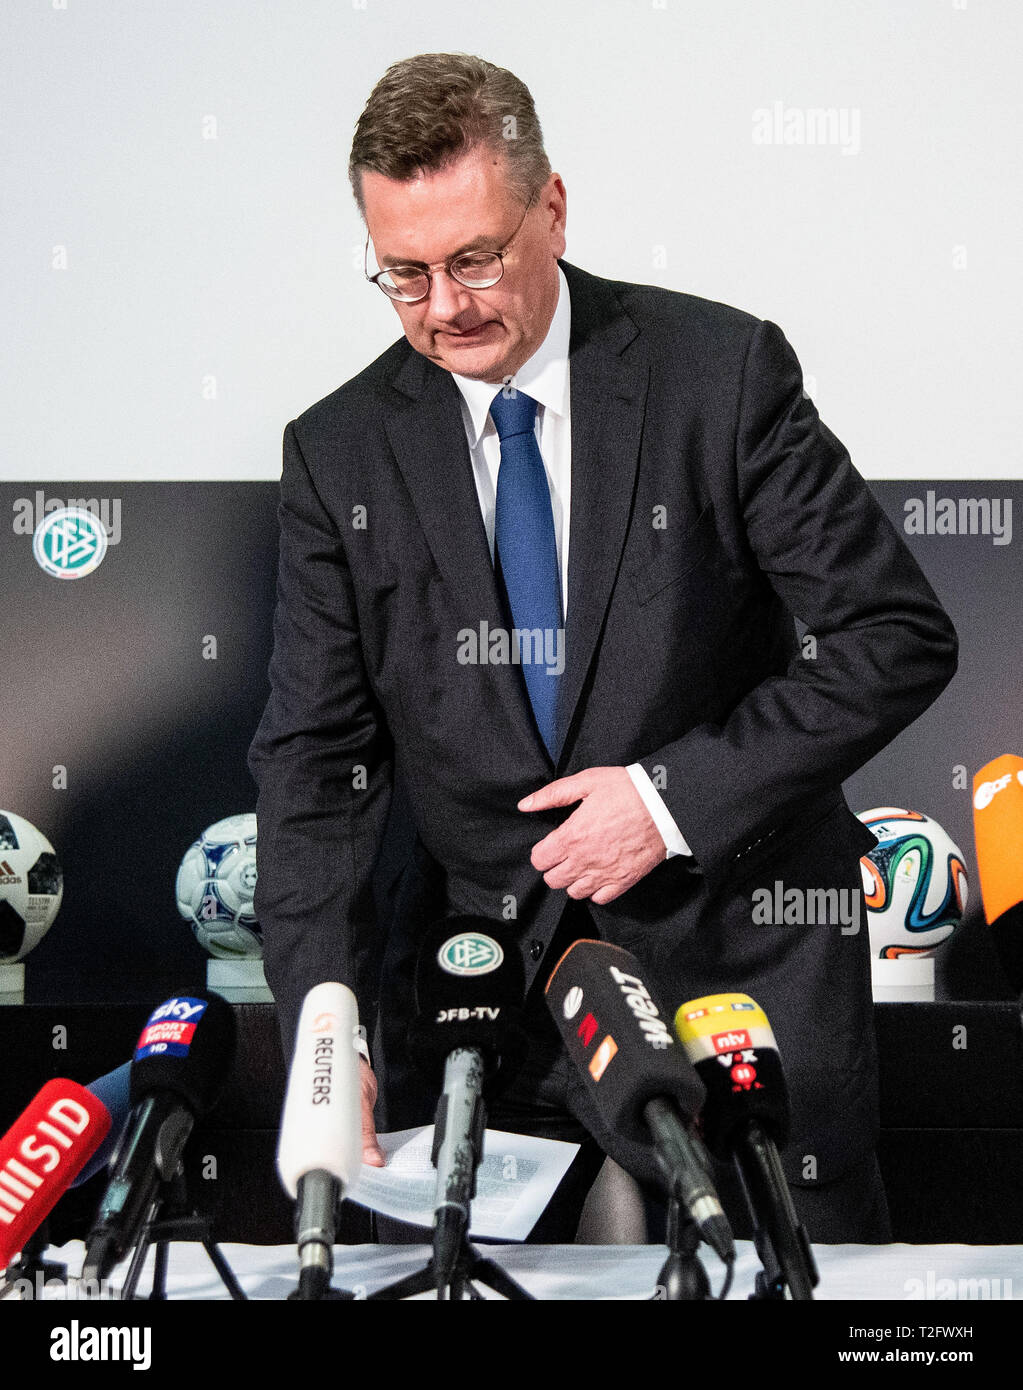 Frankfurt, Germany. 2nd Apr, 2019. President of the German Football Association (DFB) Reinhard Grindel arrives for a press conference at the headquarters of DFB in Frankfurt, Germany, on April 2, 2019. Reinhard Grindel has resigned after allegations of undeclared earnings, the DFB have confirmed in an official statement on Tuesday. Credit: Florian Ulrich/Xinhua/Alamy Live News Stock Photo